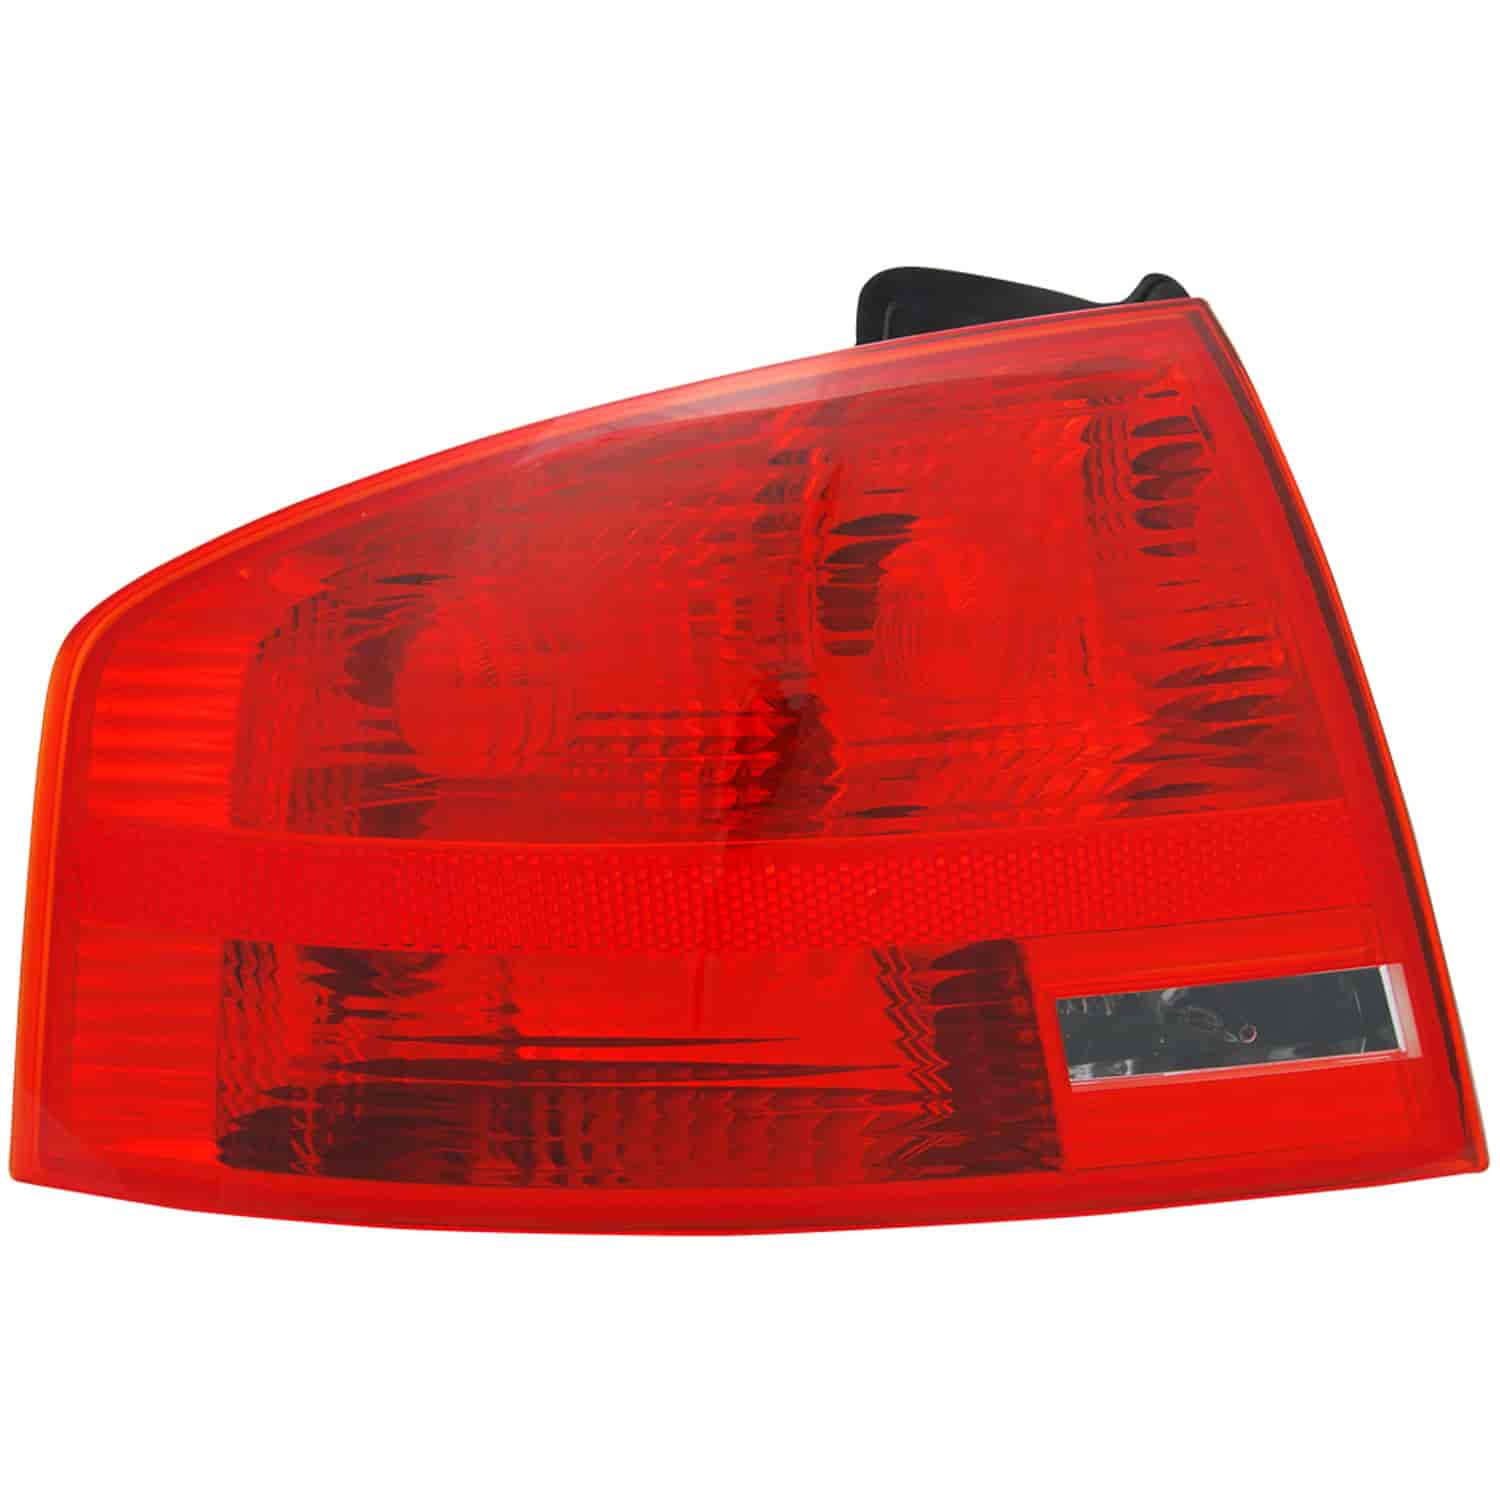 Tail Lamp Assembly for 2005-2008 Audi [Left/Driver Side